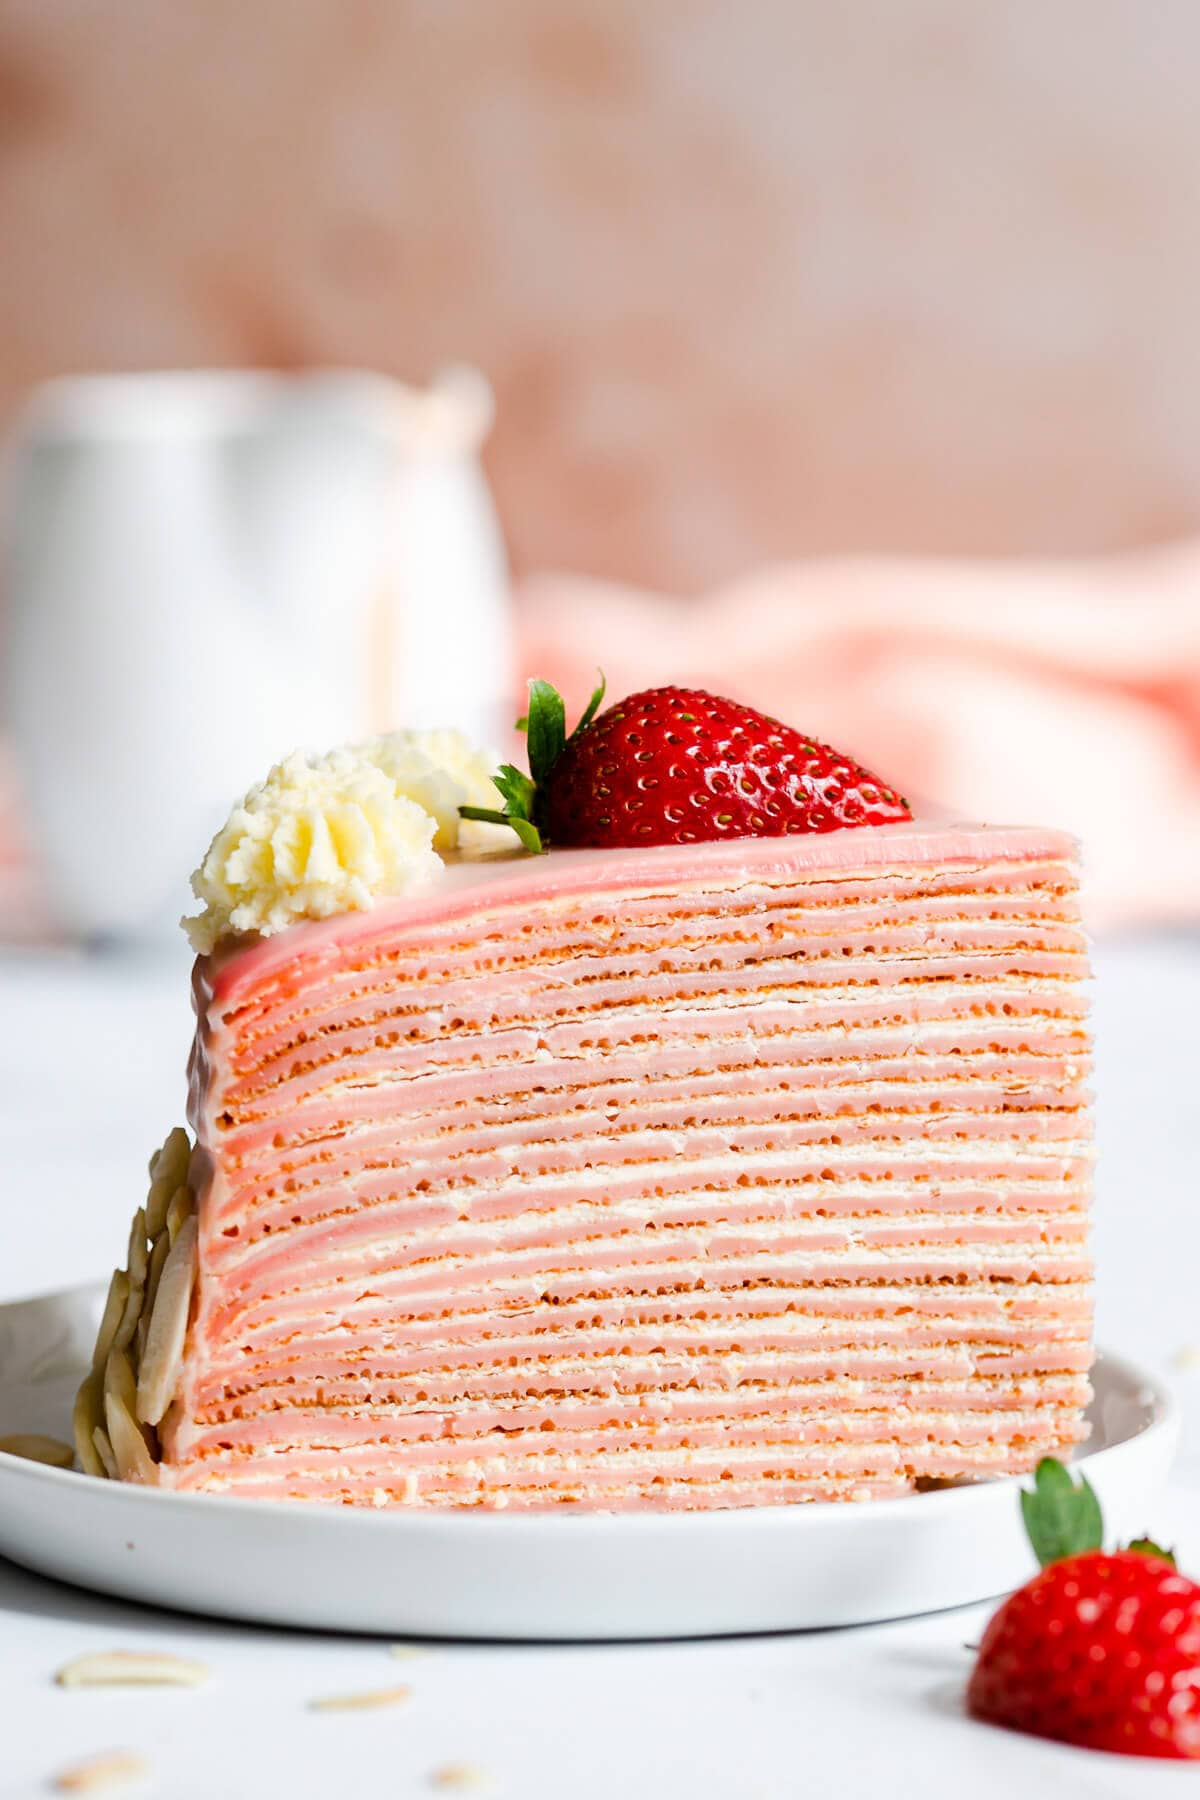 side super close up at a slice of strawberry crepe cake